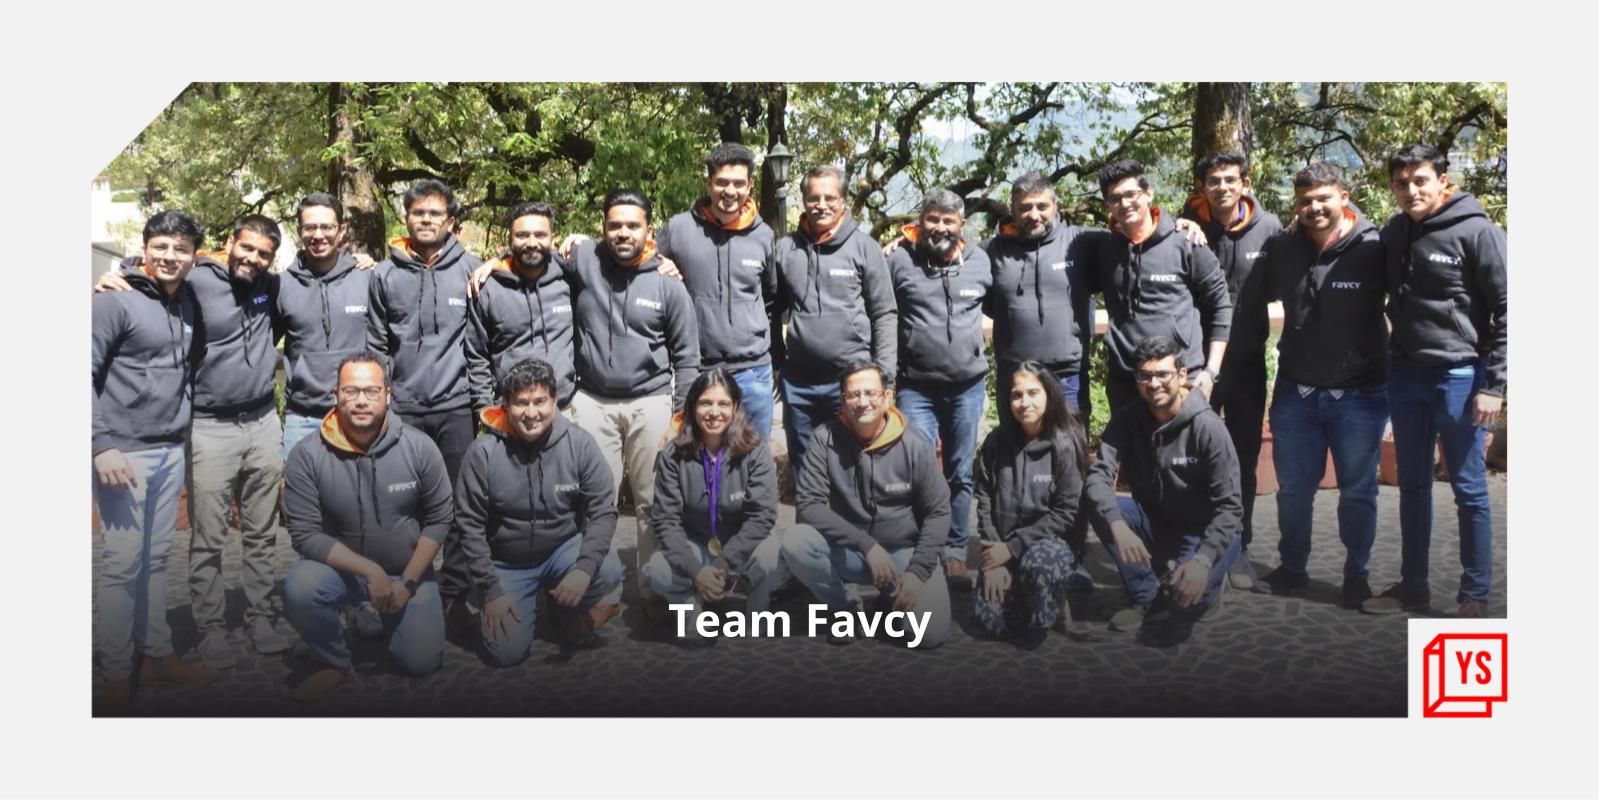 From idea to company: Behind Favcy’s startup building factory
